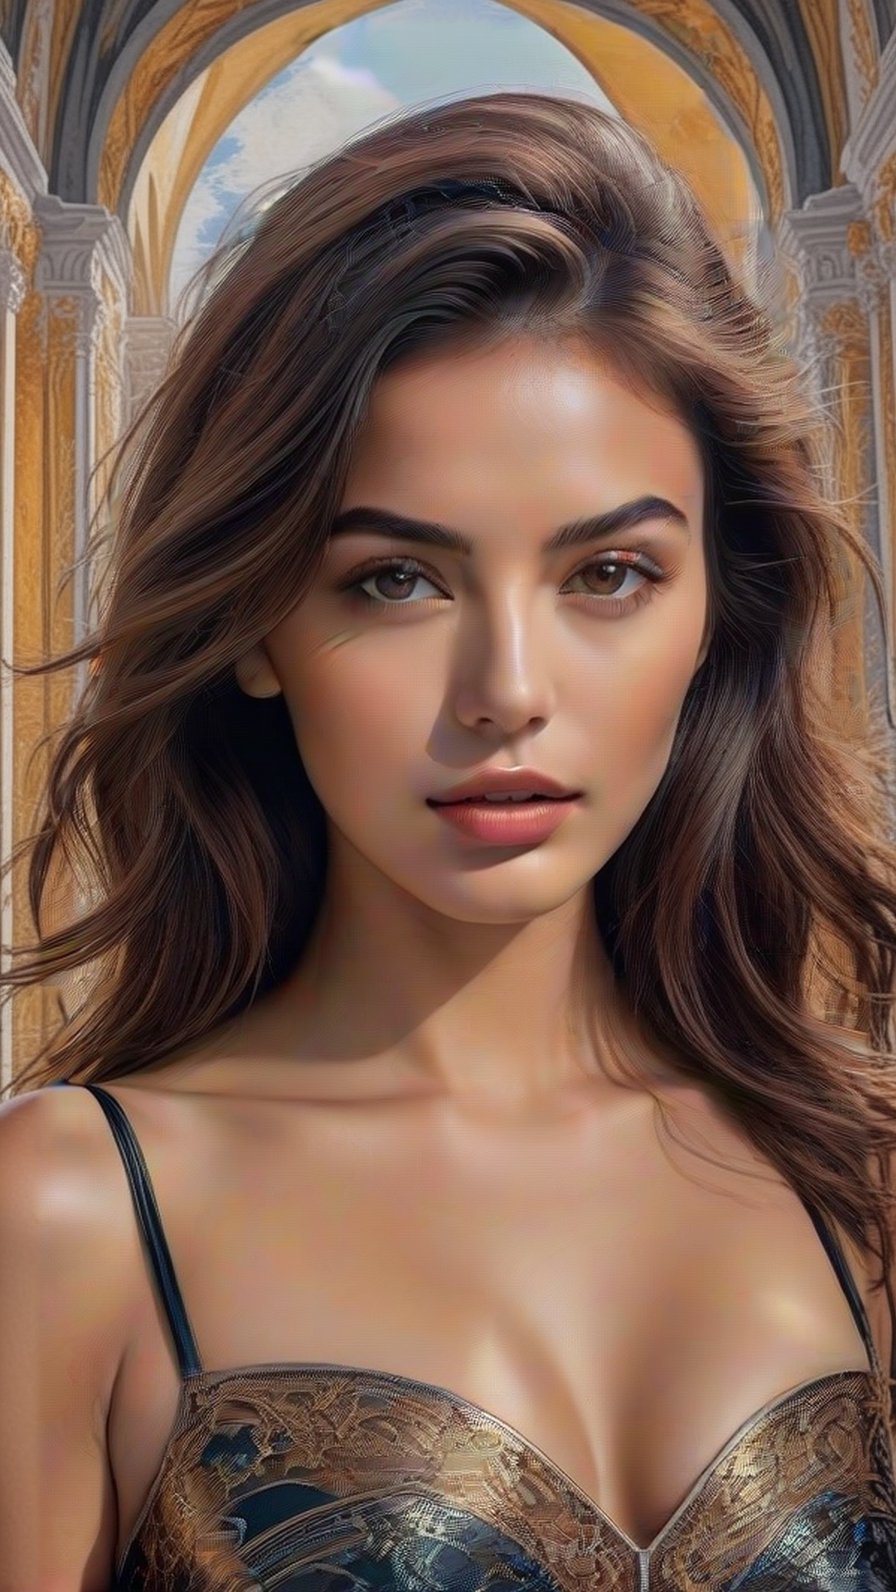 ((Hyper-Realistic)) (fullbody:1.3) photo of a girl,20yo,1girl,brazilian girl,detailed exquisite symmetric face,soft shiny skin,glossy lips,smile,mesmerizing, disheveled hair,perfect female form,perfect body proportion,perfect anatomy,elegant dress,vibrant colors
BREAK
(ultra-detailed hyper-realistic photographic backdrop of Esztergom Basilica, a spiritual center with magnificent cathedrals in northern Hungary,distant view:1.5)
BREAK
rule of thirds,perfect composition,studio photo,trending on artstation,(Masterpiece,Best quality,32k,UHD:1.7),(sharp focus,high contrast,HDR,ray tracing,hyper-detailed,intricate details,ultra-realistic,award-winning photo,kodachrome 800:1.7),(chiaroscuro lighting,soft rim lighting,key light reflecting in the eyes:1.5),by Karol Bak,Alessandro Pautasso and Hayao Miyazaki,
real_booster,art_booster,photo_b00ster,seolhyun